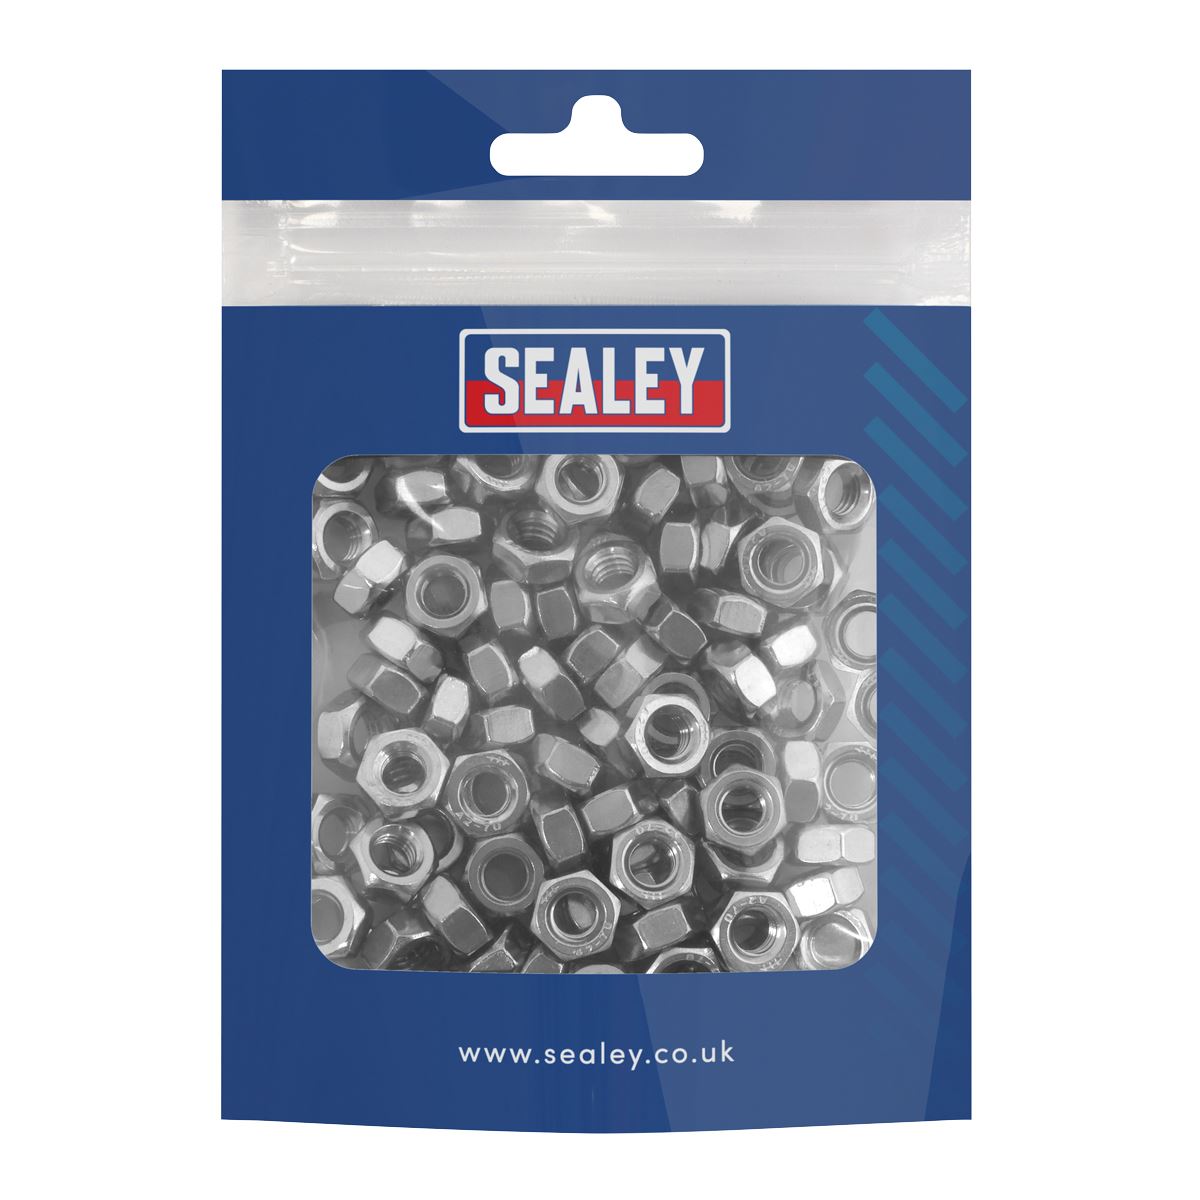 Sealey Stainless Steel Nut Din 934 – M6 - Pack of 100